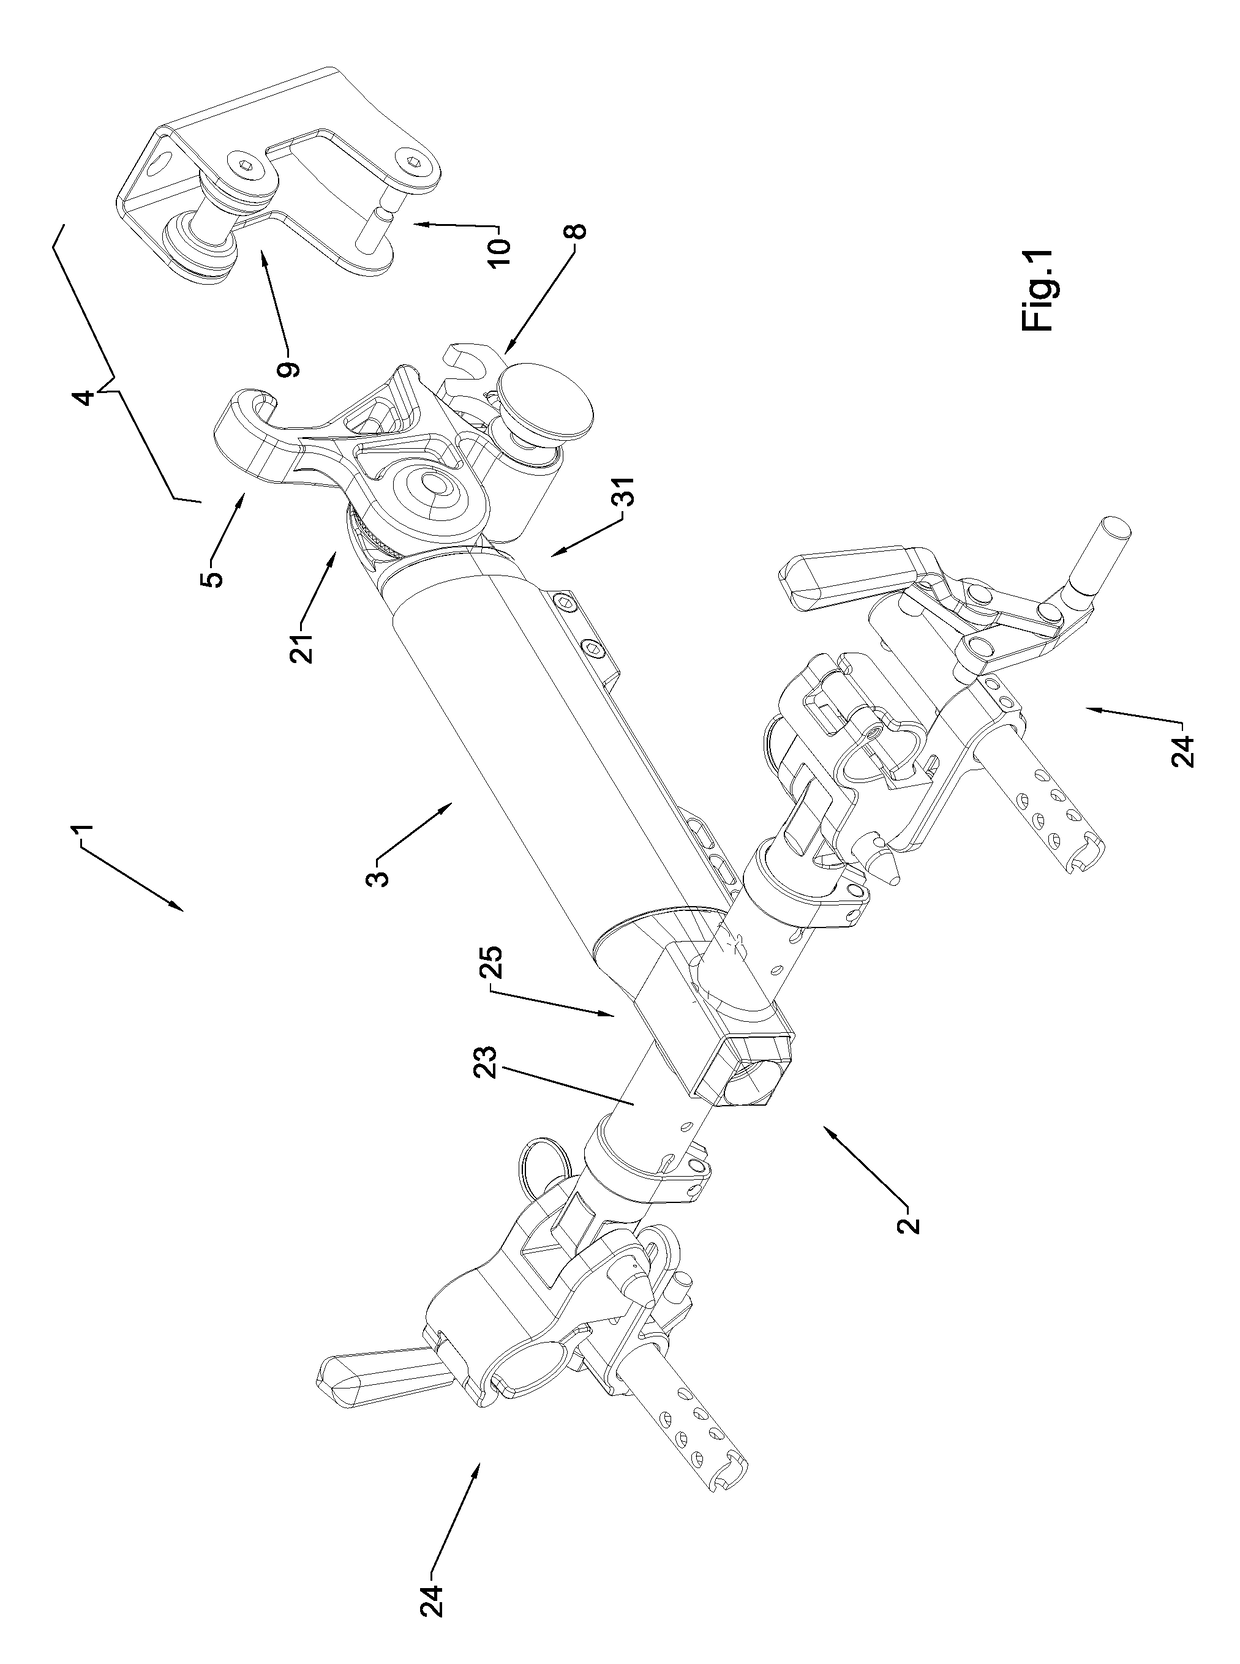 Connection assembly for coupling an auxiliary drive system to a wheelchair for disabled people